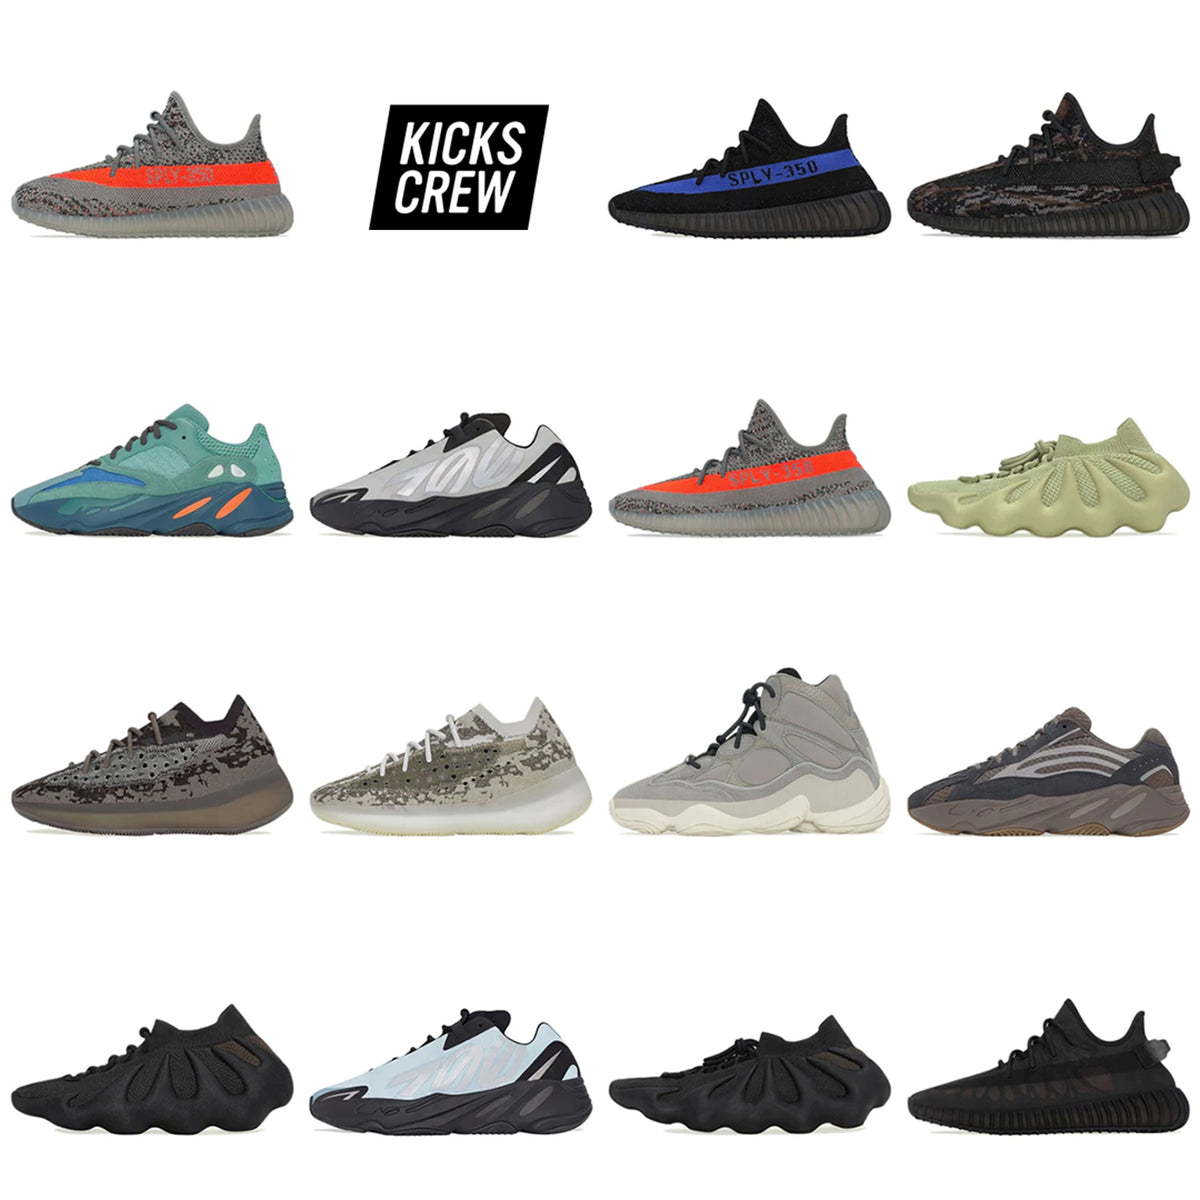 What Is the Best Yeezy 350 V2 Colorway? - KICKS CREW